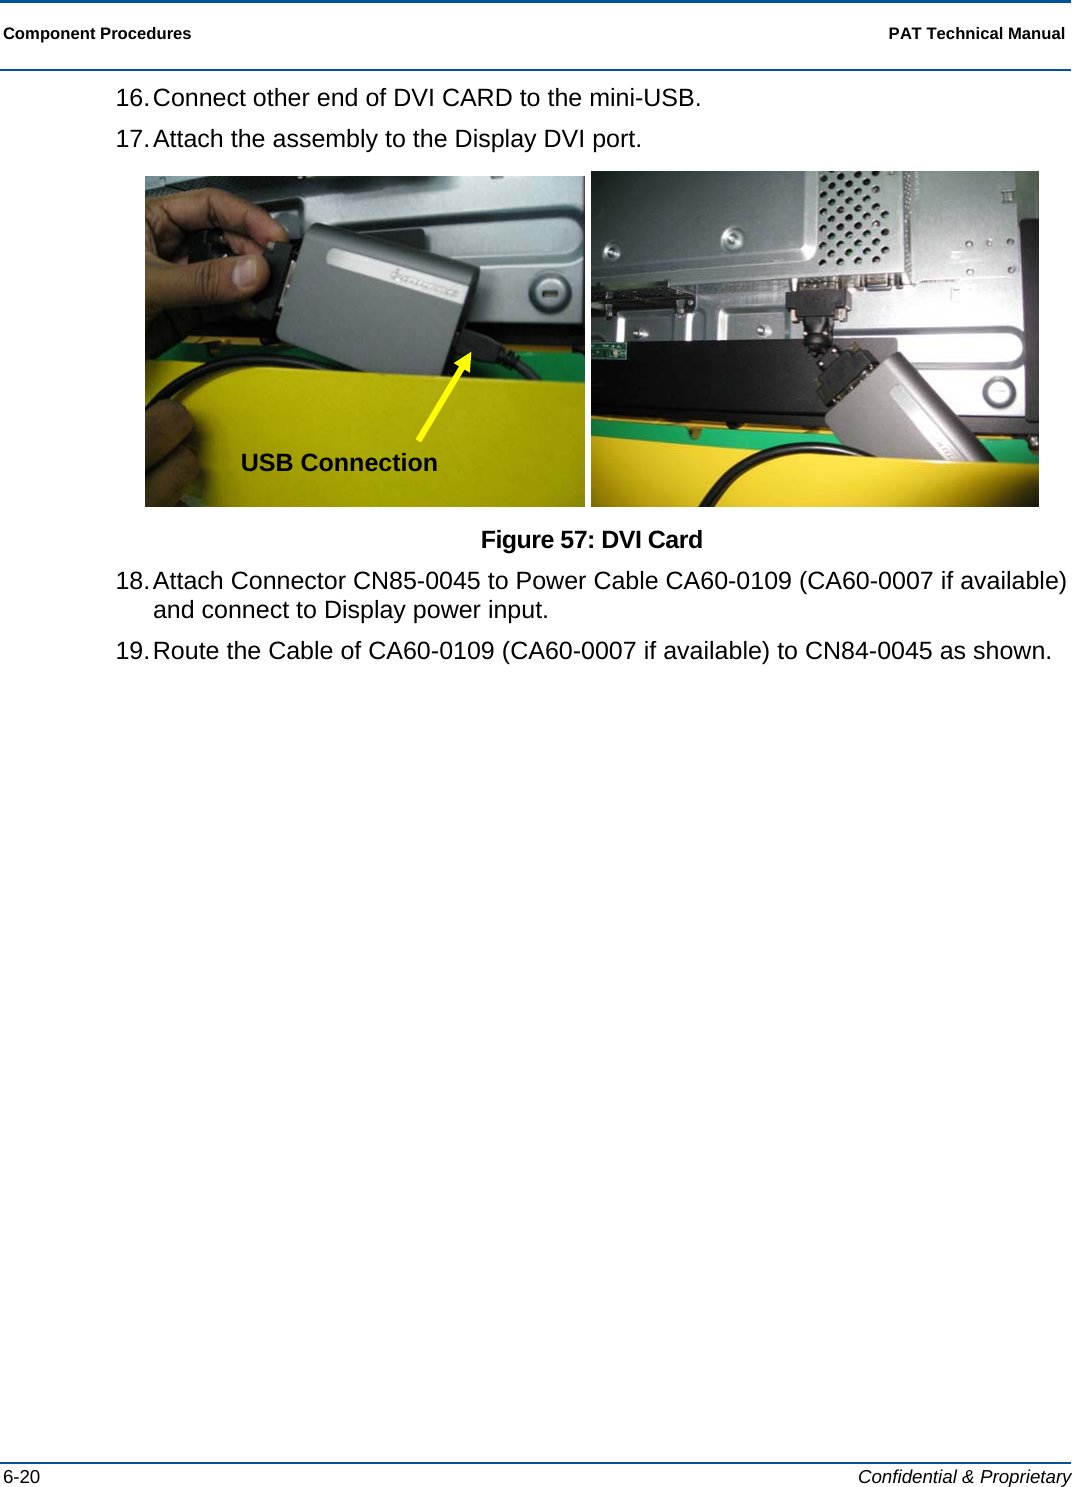  Component Procedures  PAT Technical Manual  6-20  Confidential &amp; Proprietary 16. Connect other end of DVI CARD to the mini-USB. 17. Attach the assembly to the Display DVI port.    Figure 57: DVI Card 18. Attach Connector CN85-0045 to Power Cable CA60-0109 (CA60-0007 if available) and connect to Display power input. 19. Route the Cable of CA60-0109 (CA60-0007 if available) to CN84-0045 as shown. USB Connection 